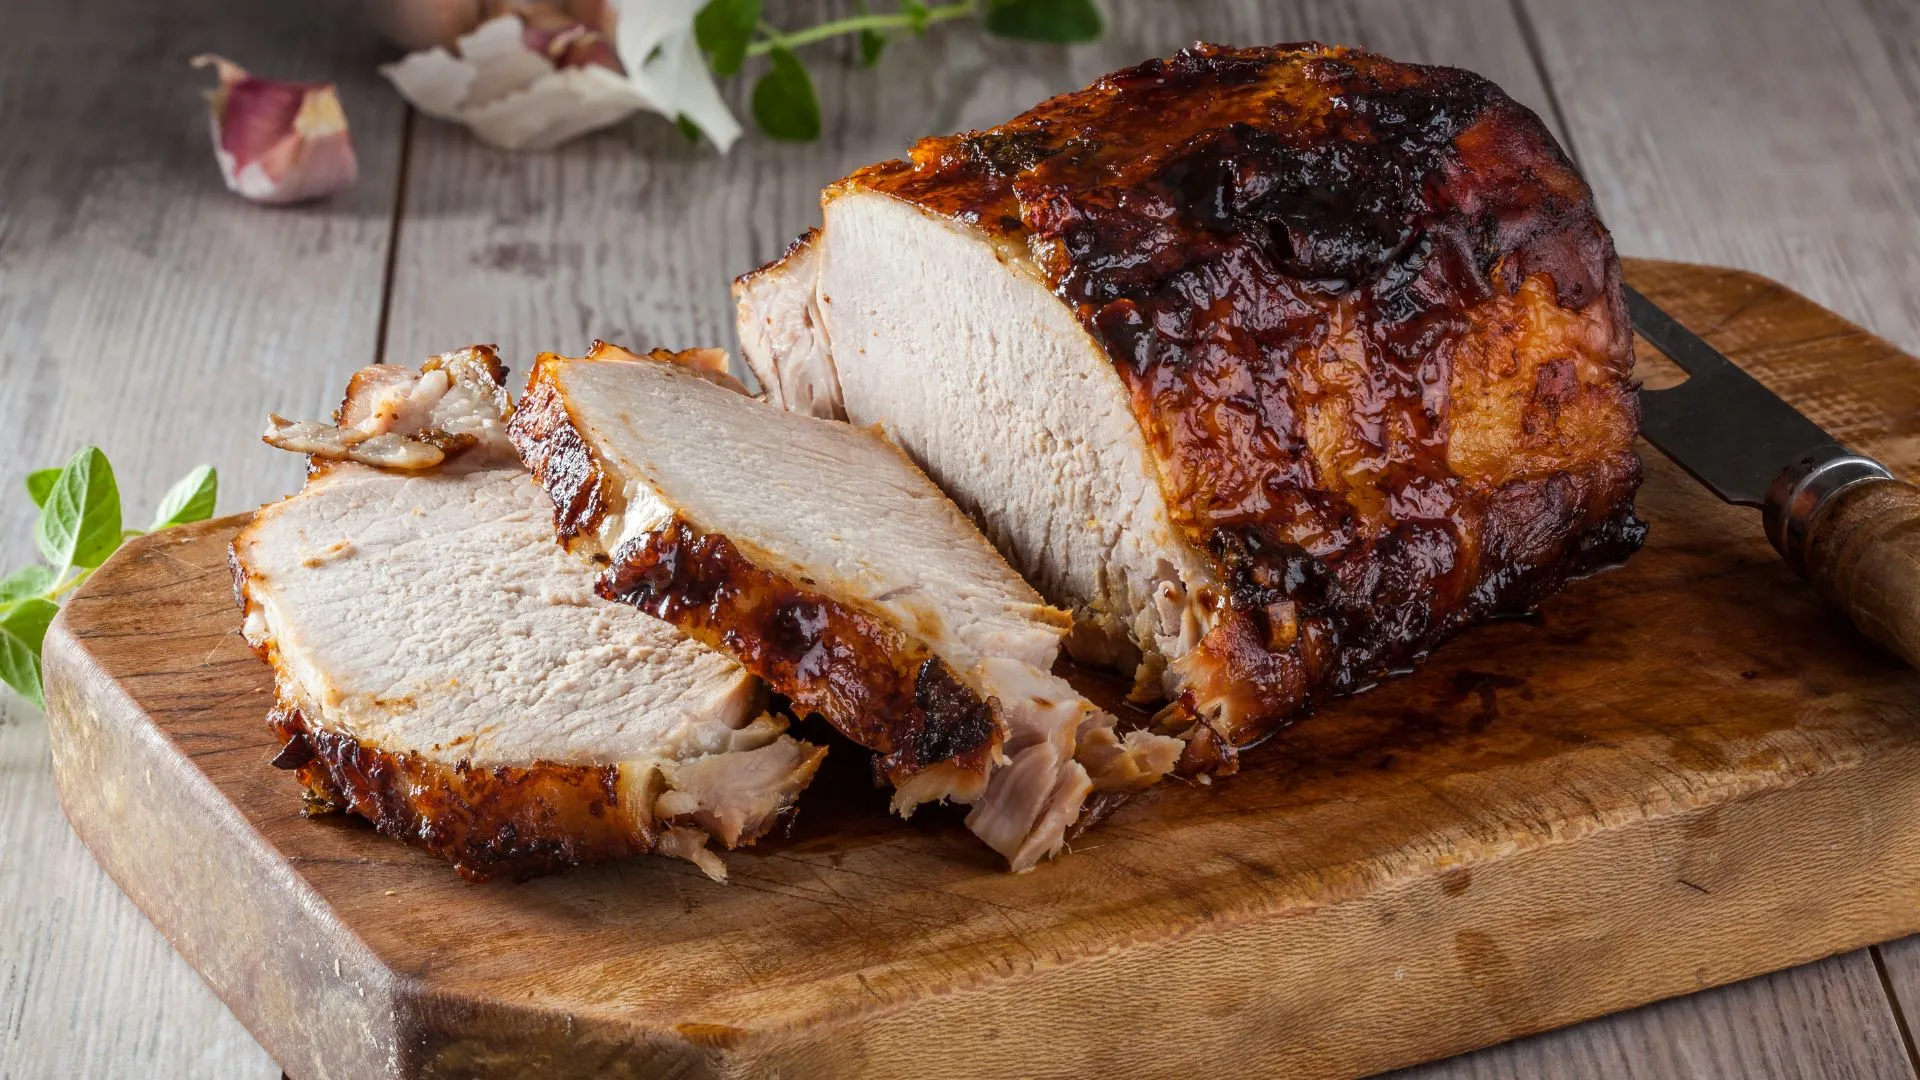 Oven Roasted Pork Loin Recipe with Balsamic Fig Sauce